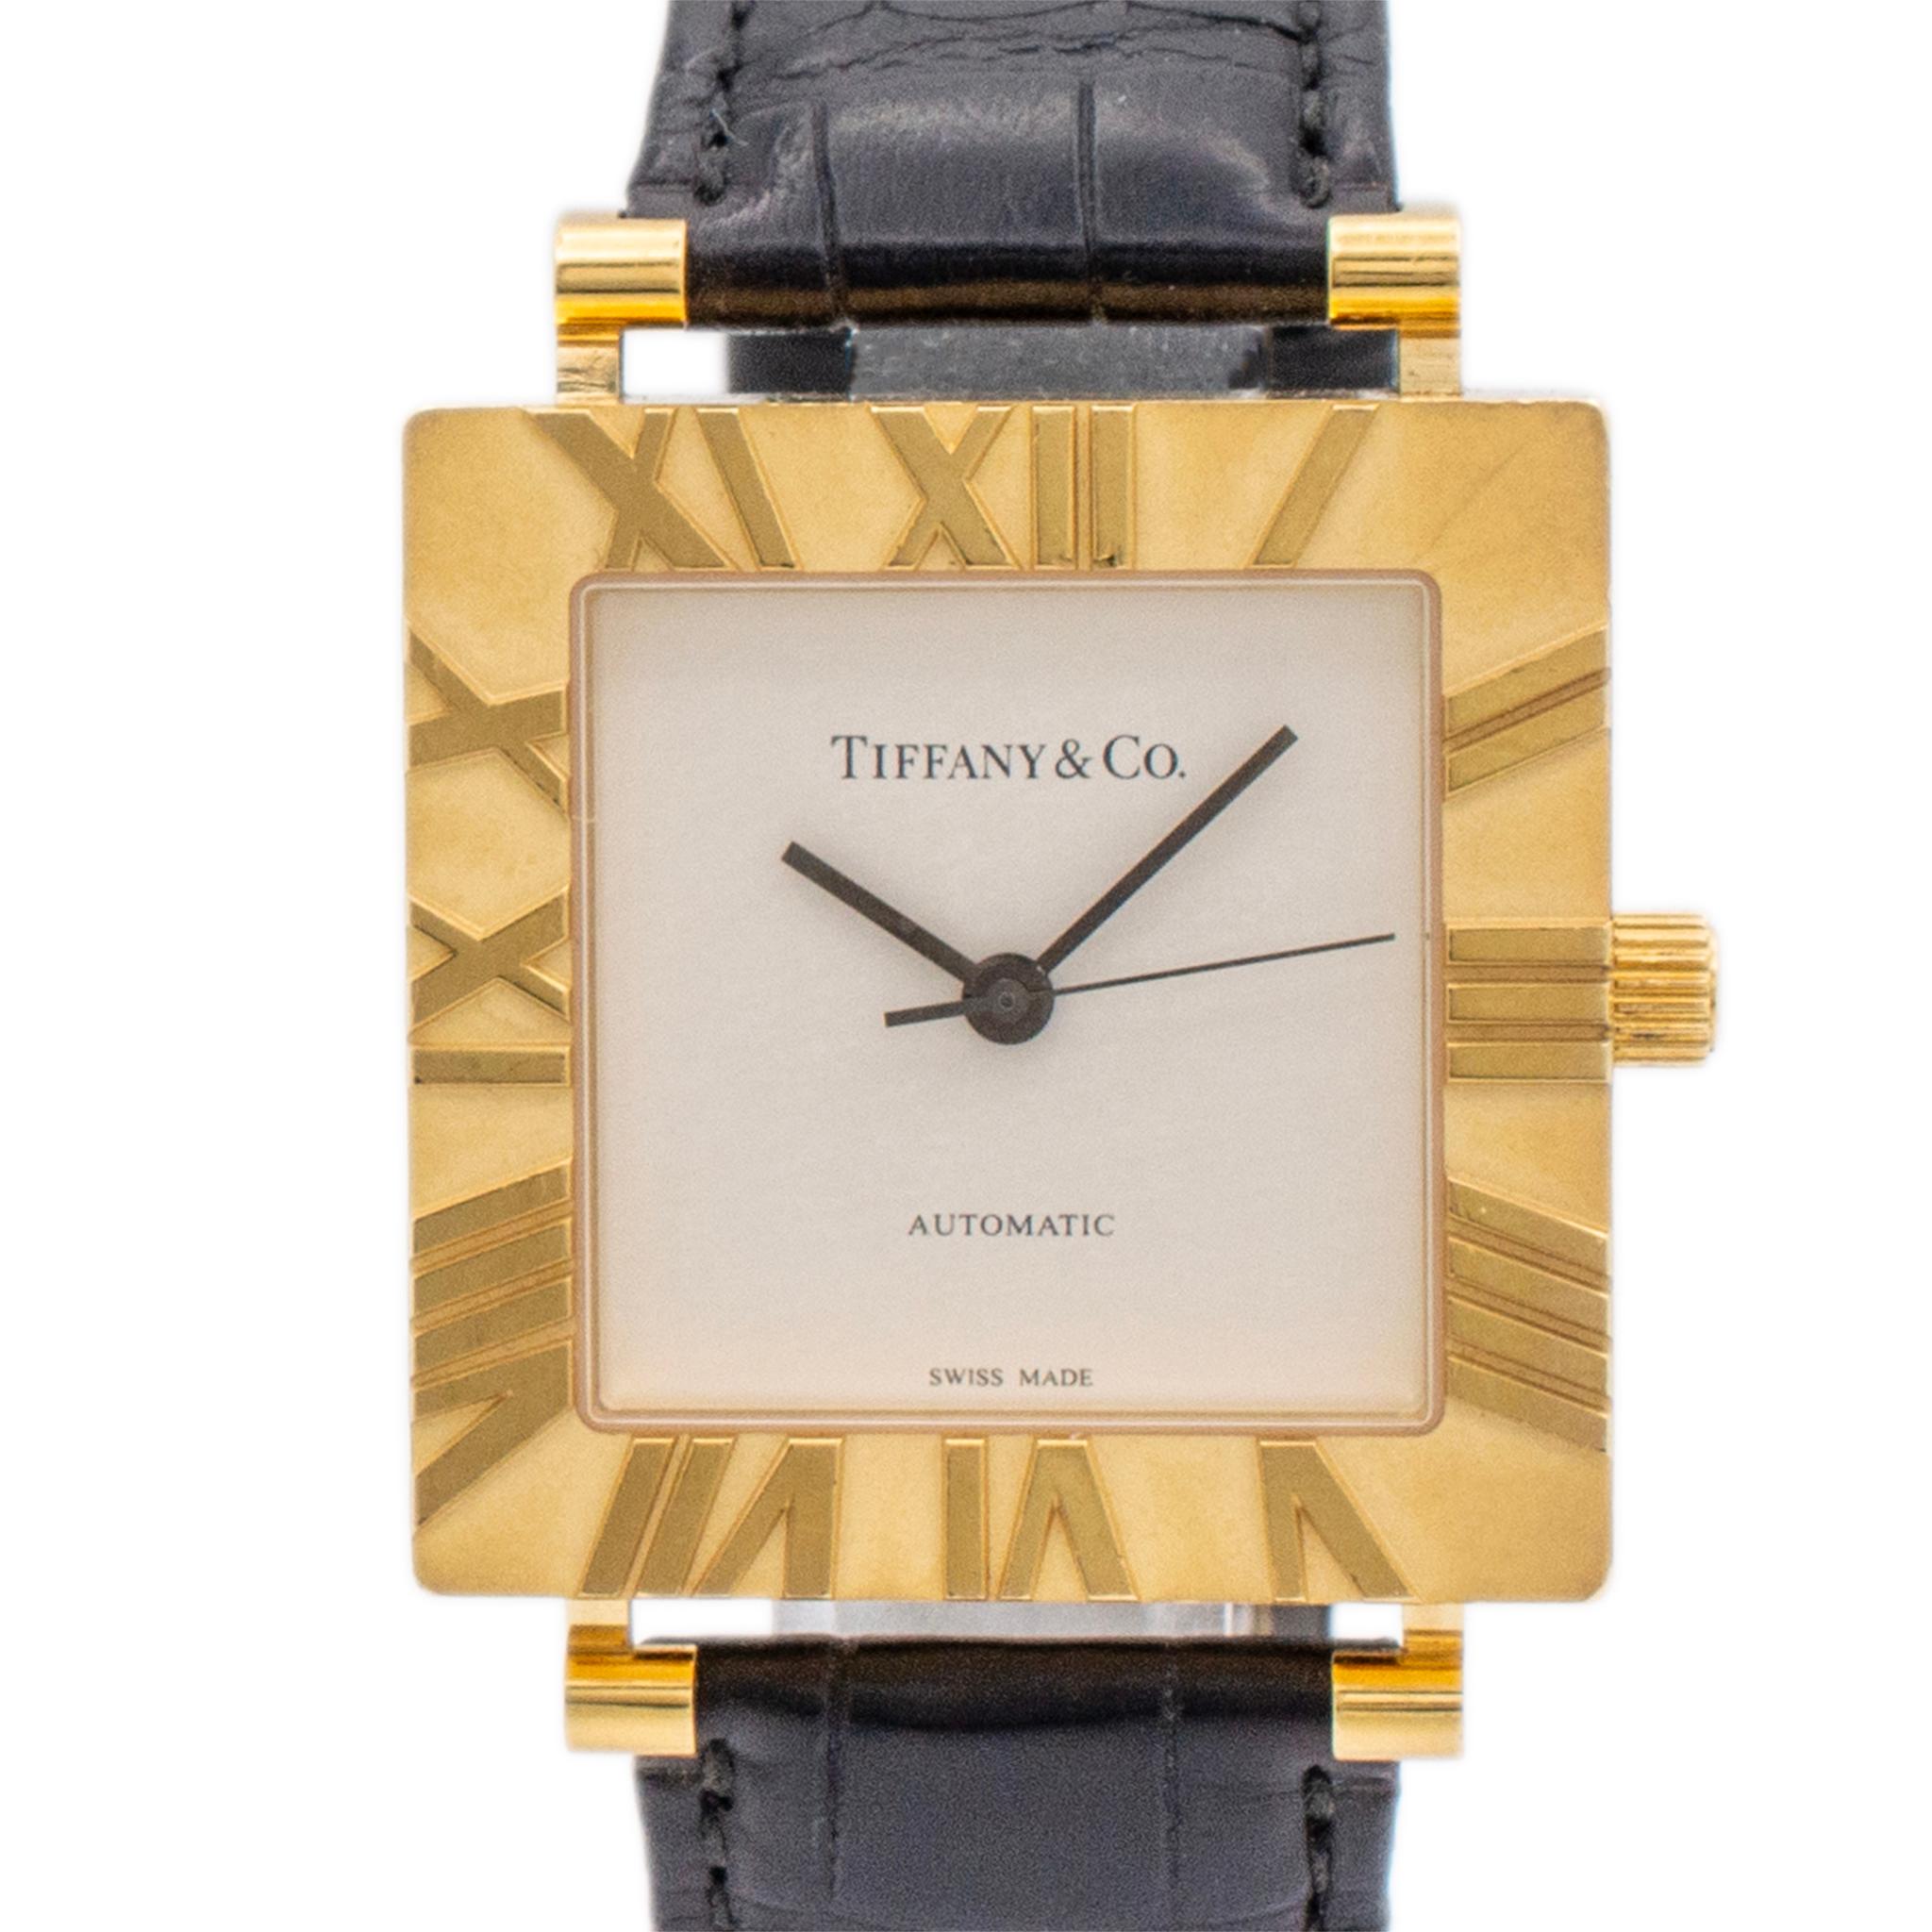 Brand: Tiffany & Co.

Gender: Unisex

Metal Type: 18K Yellow Gold

Diameter: 34.00 mm

Weight: 88.76 Grams

18K yellow gold Swiss made watch with original box. The metal was tested and determined to be 18K yellow gold. Engraved with 